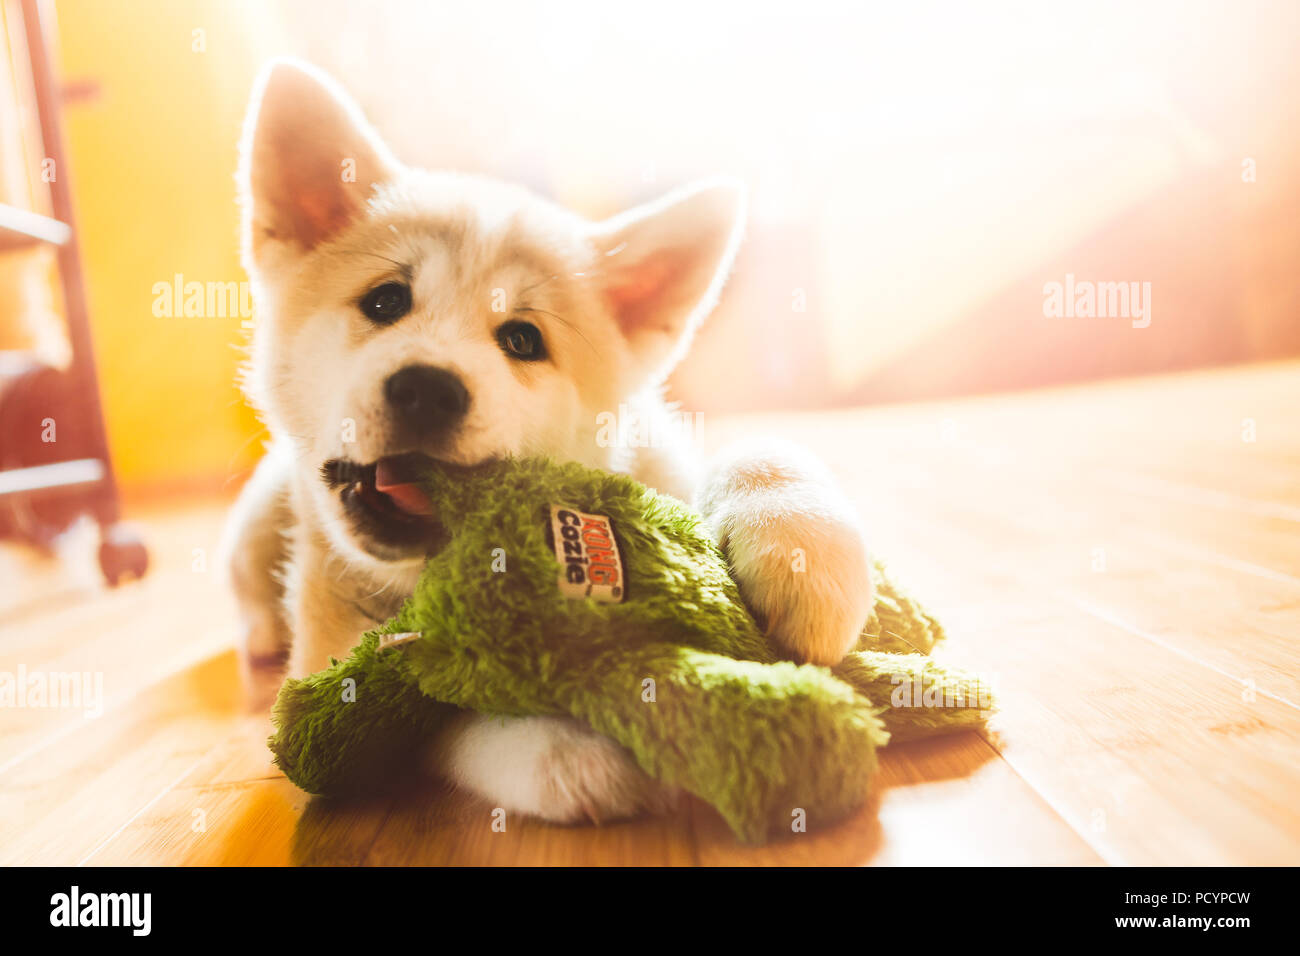 Japanese Akita Inu puppy, white and red dog close up chewing a toy Stock Photo